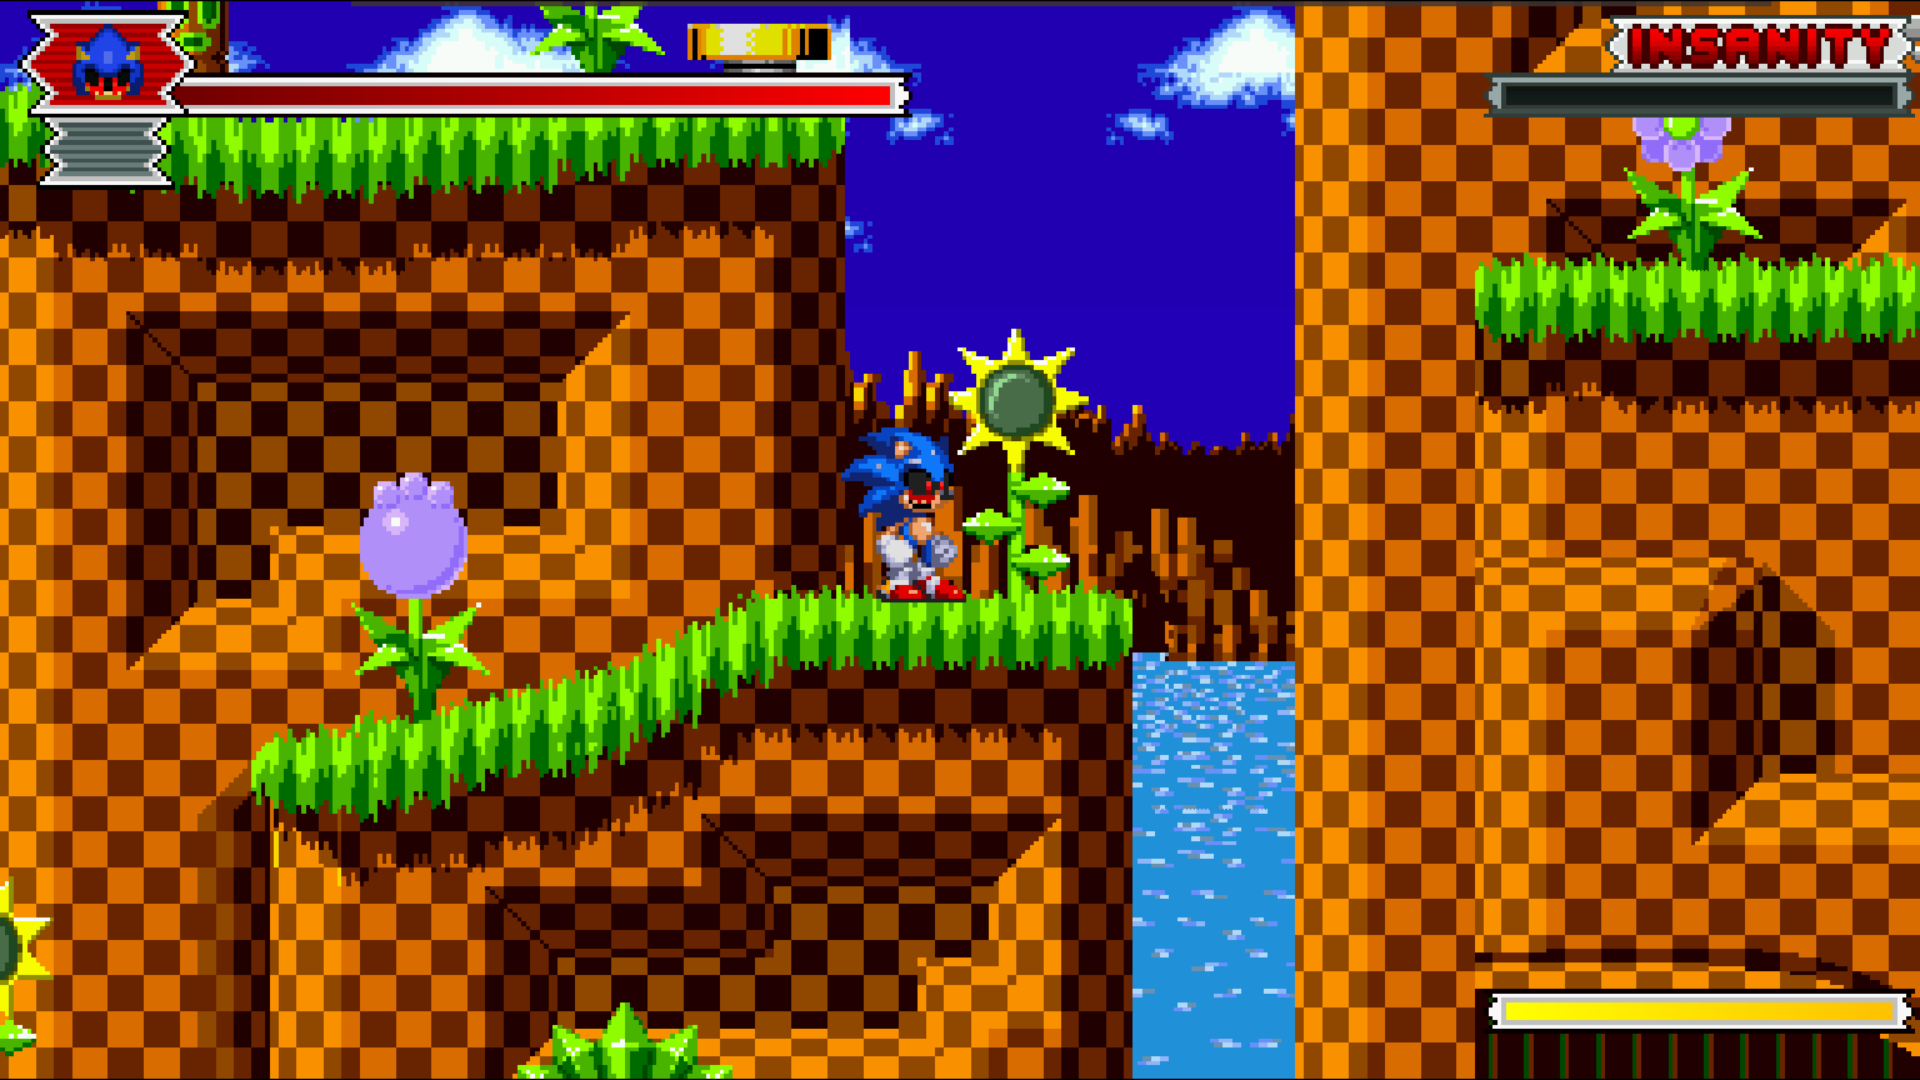 Green Hill Zone (The Prophecy)  Sonic.exe Spirits Of Hell Wiki